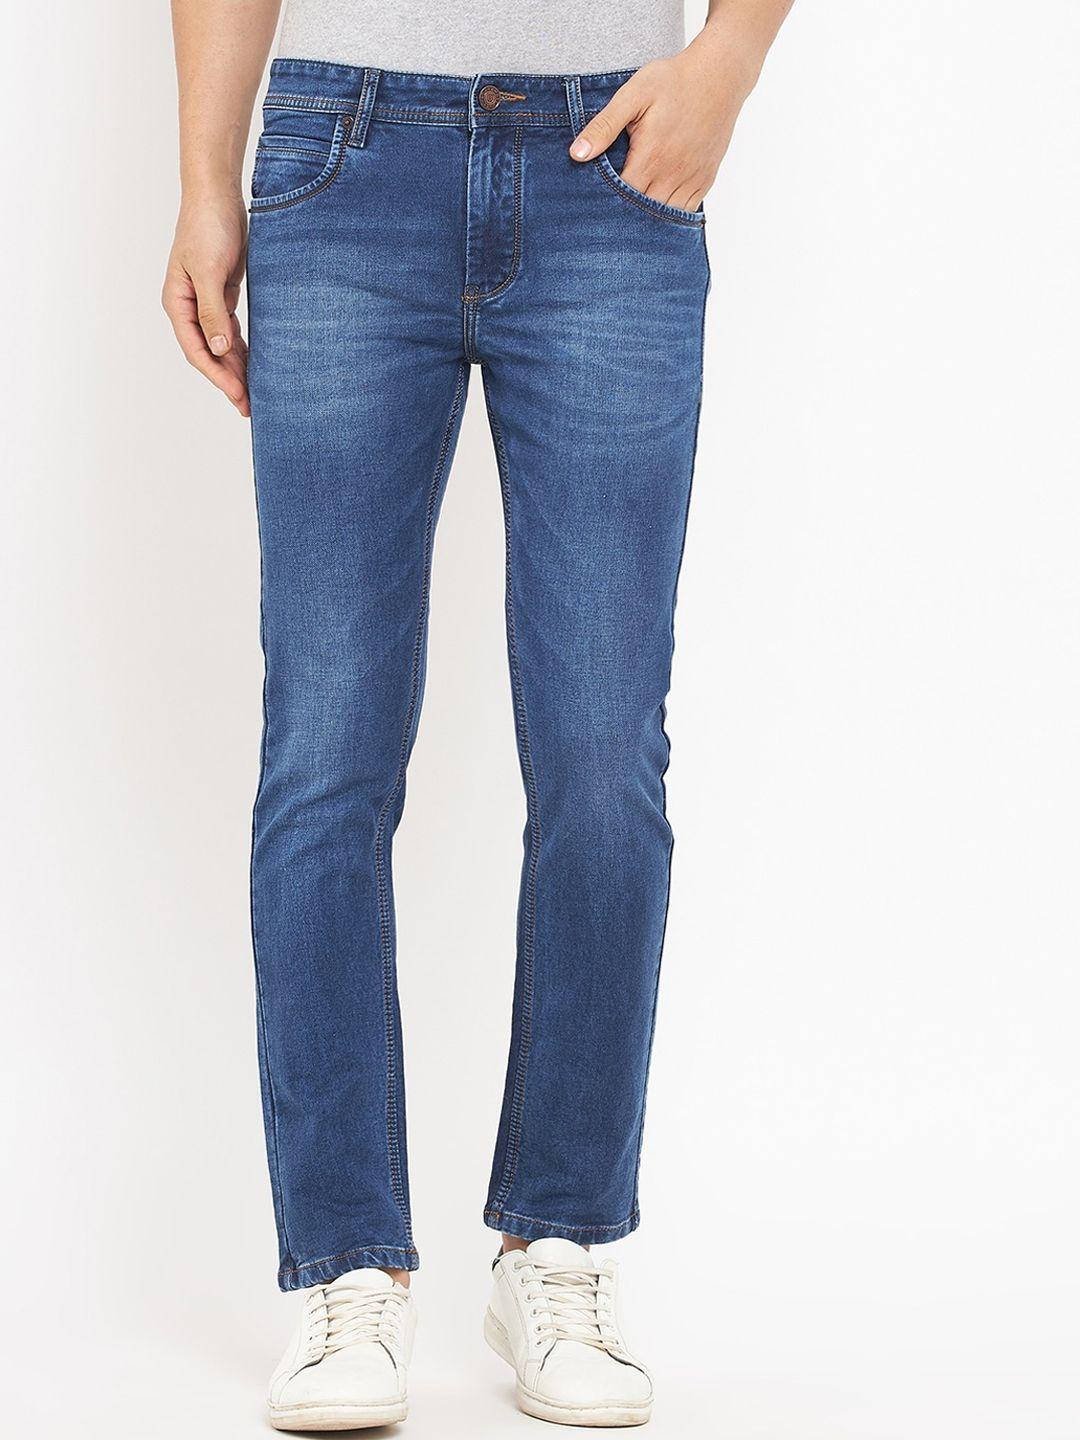 duke-men-slim-fit-mid-rise-heavy-fade-stretchable-jeans